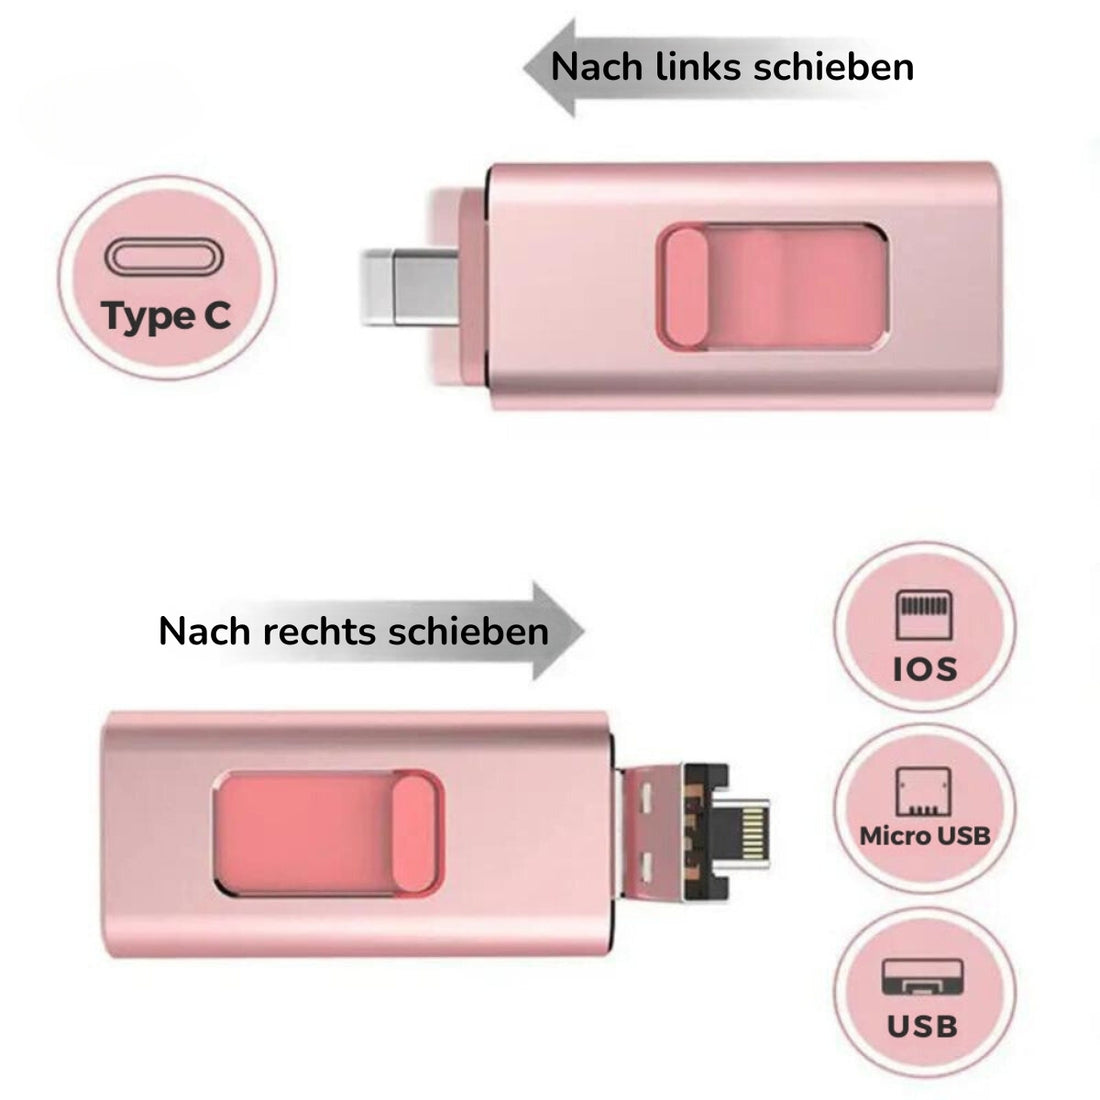 Serenosole Flashdrive | Never again a full phone with our 4 in 1 flash drive. He fits on every device!